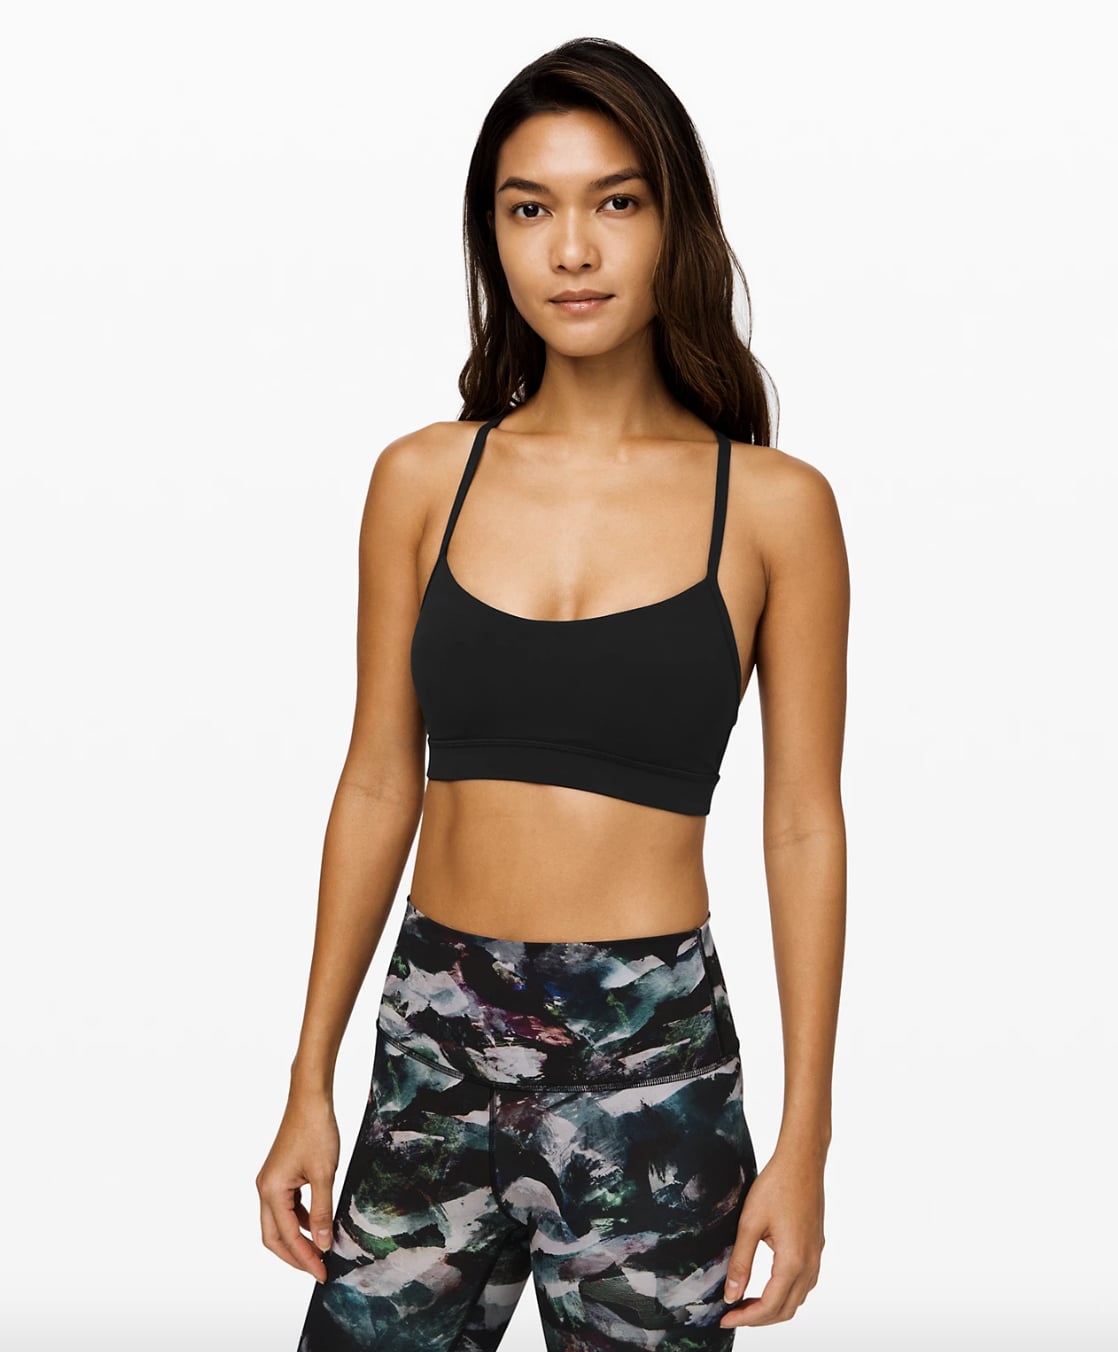 Best Lululemon Sports Bra For Small Busts